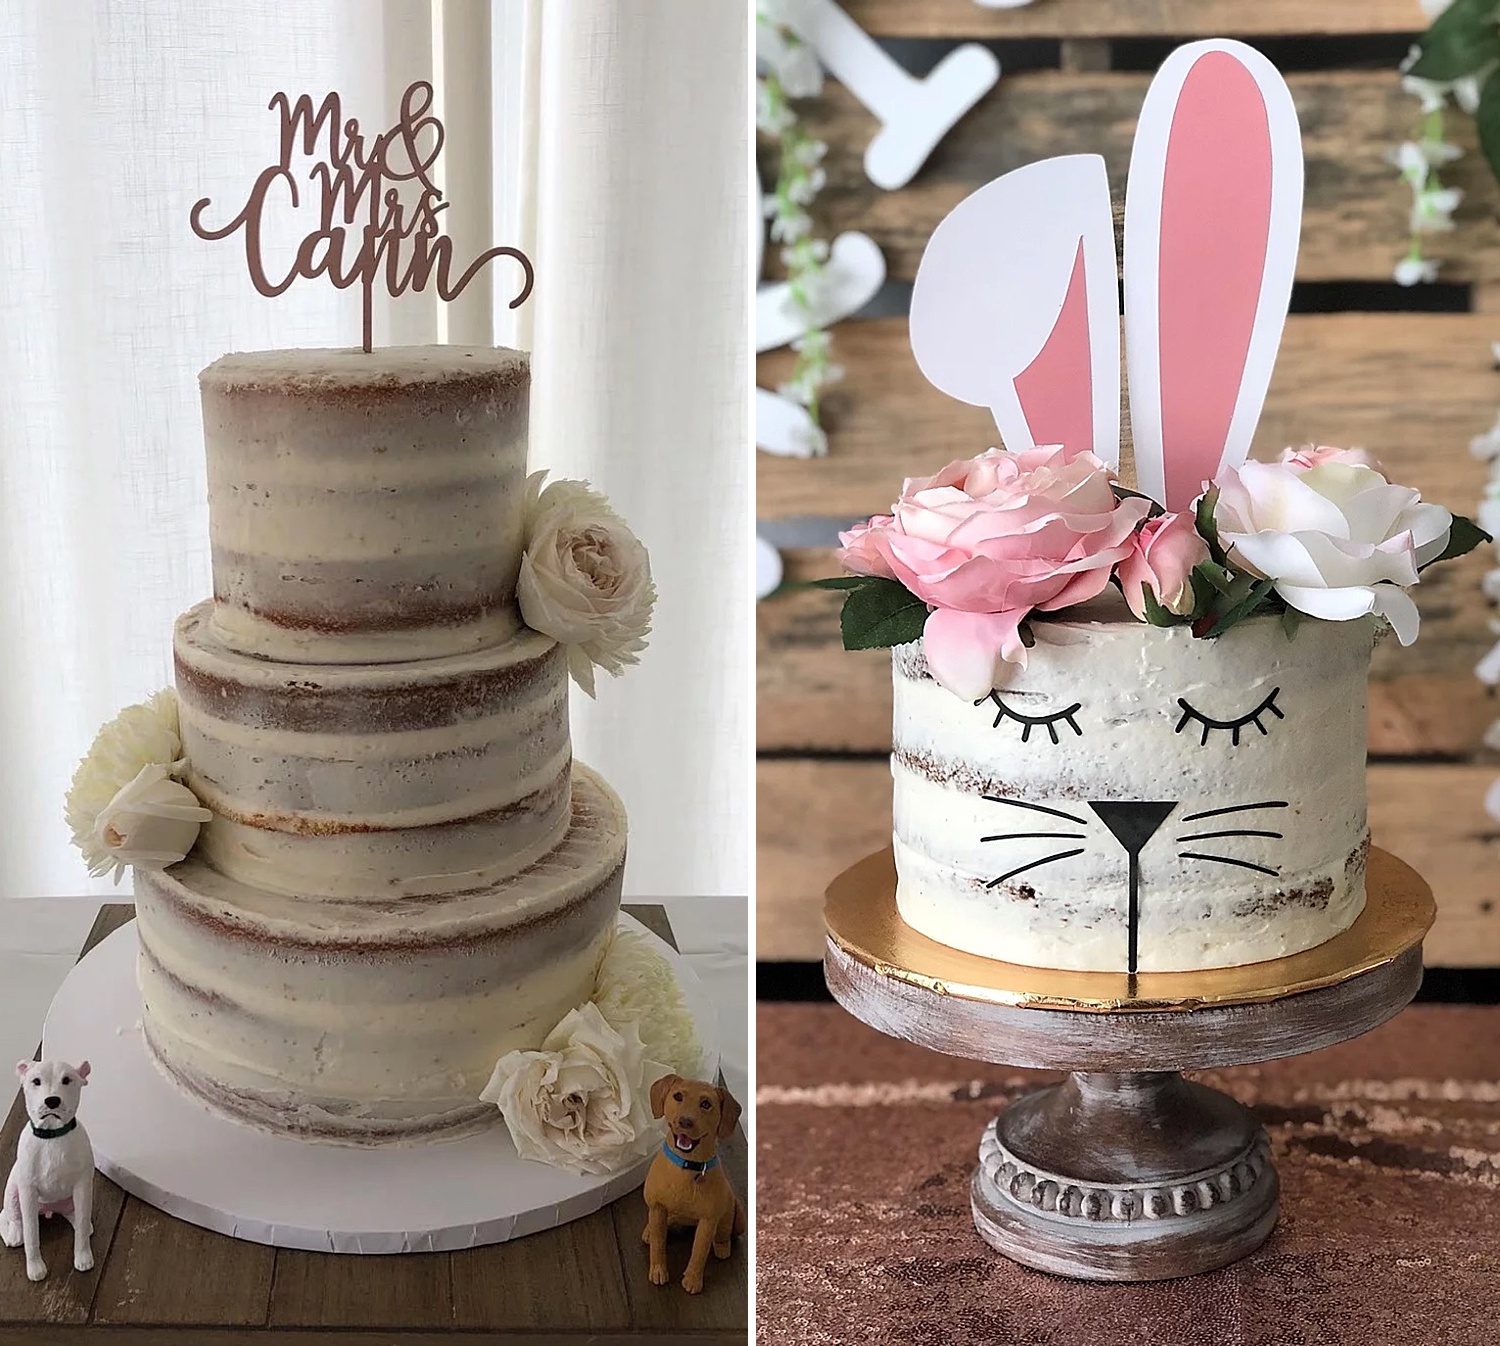 Two images of vanilla buttercream naked cakes by South Florida baker, Christals Creations